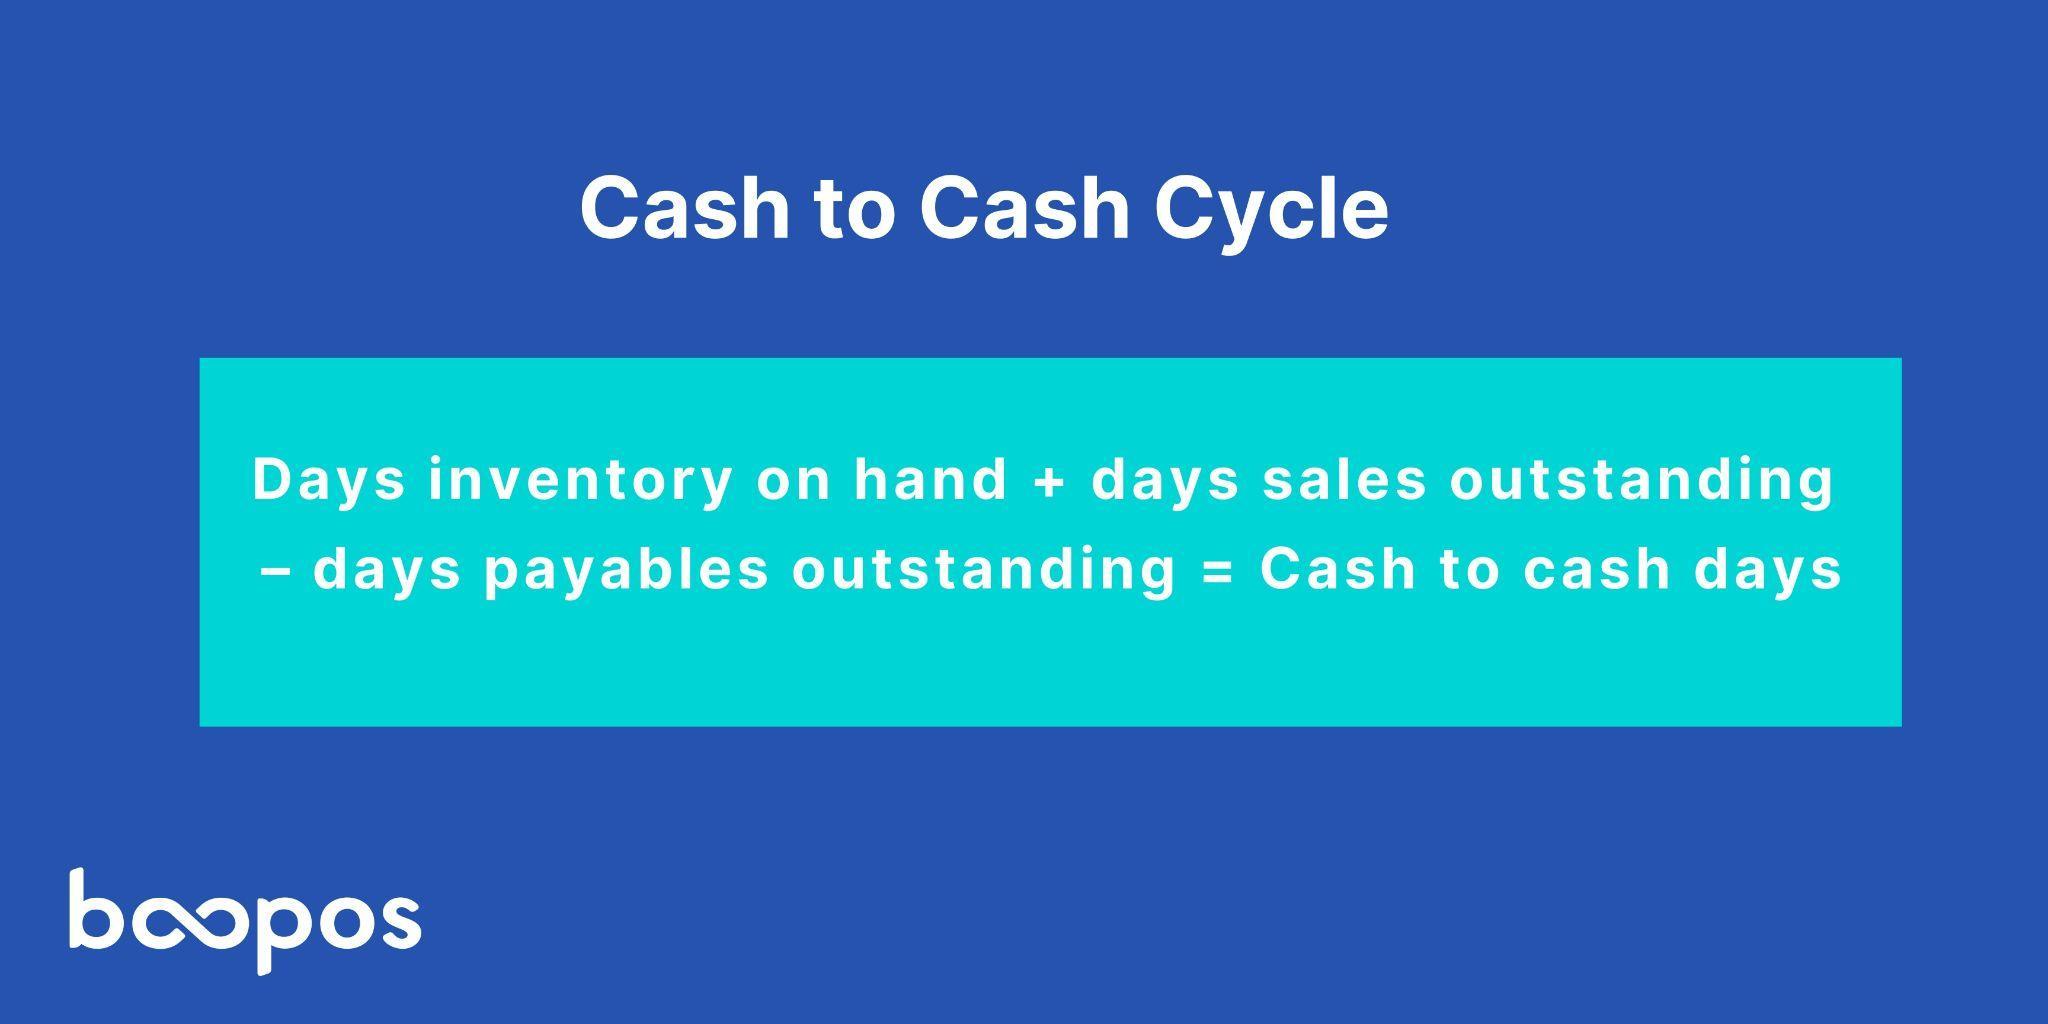 Cash to cash cycle